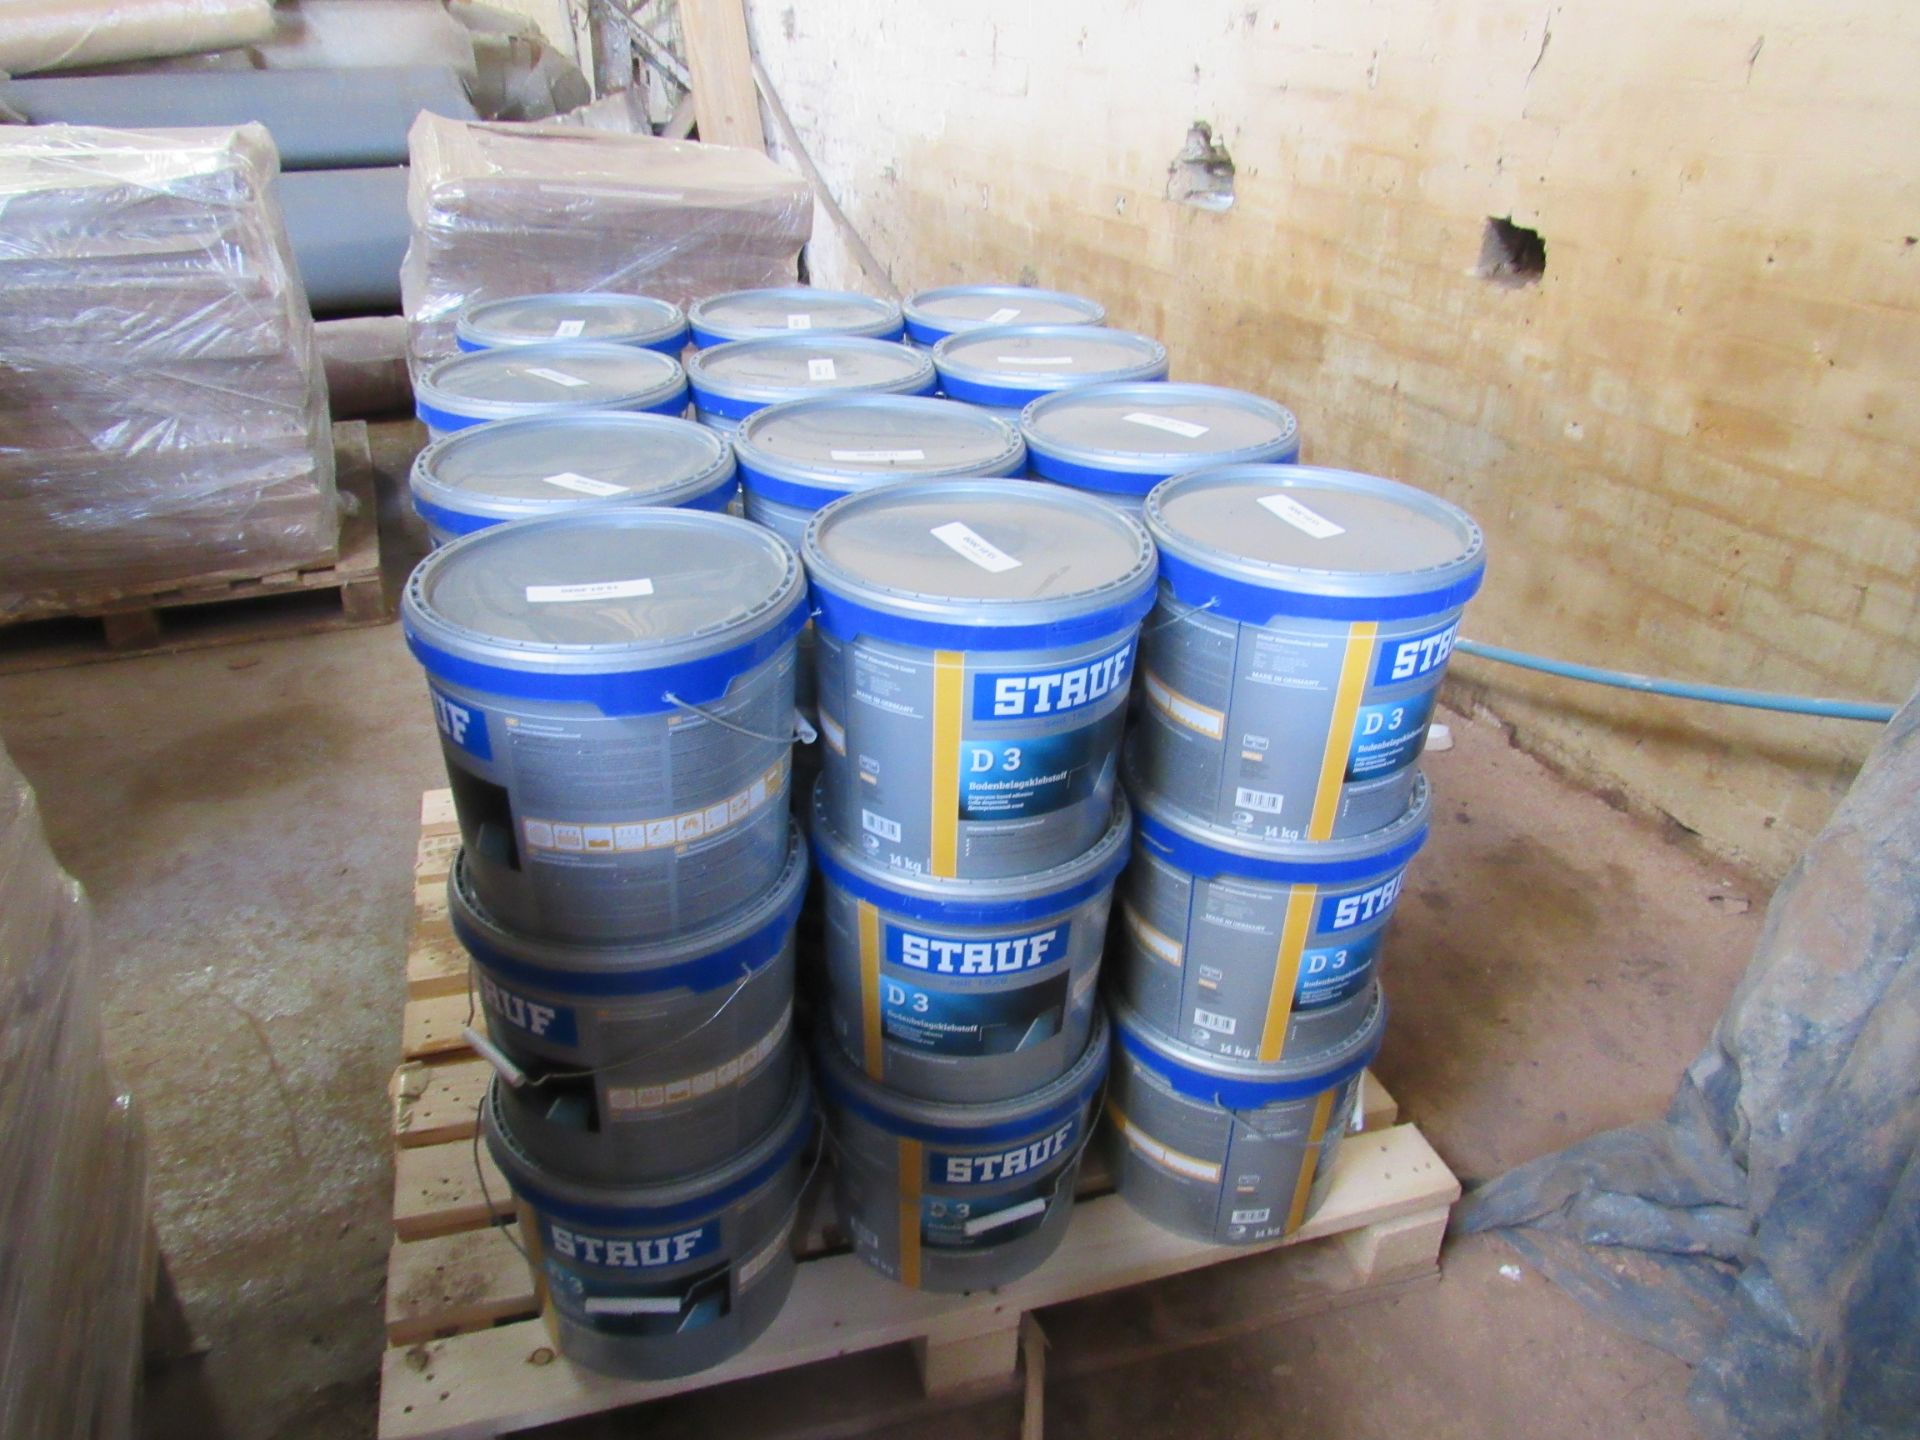 STAUF D3 Universal dispersion-based adhesive for floor coverings, approx. 36tubs to pallet (Unit 1 ,